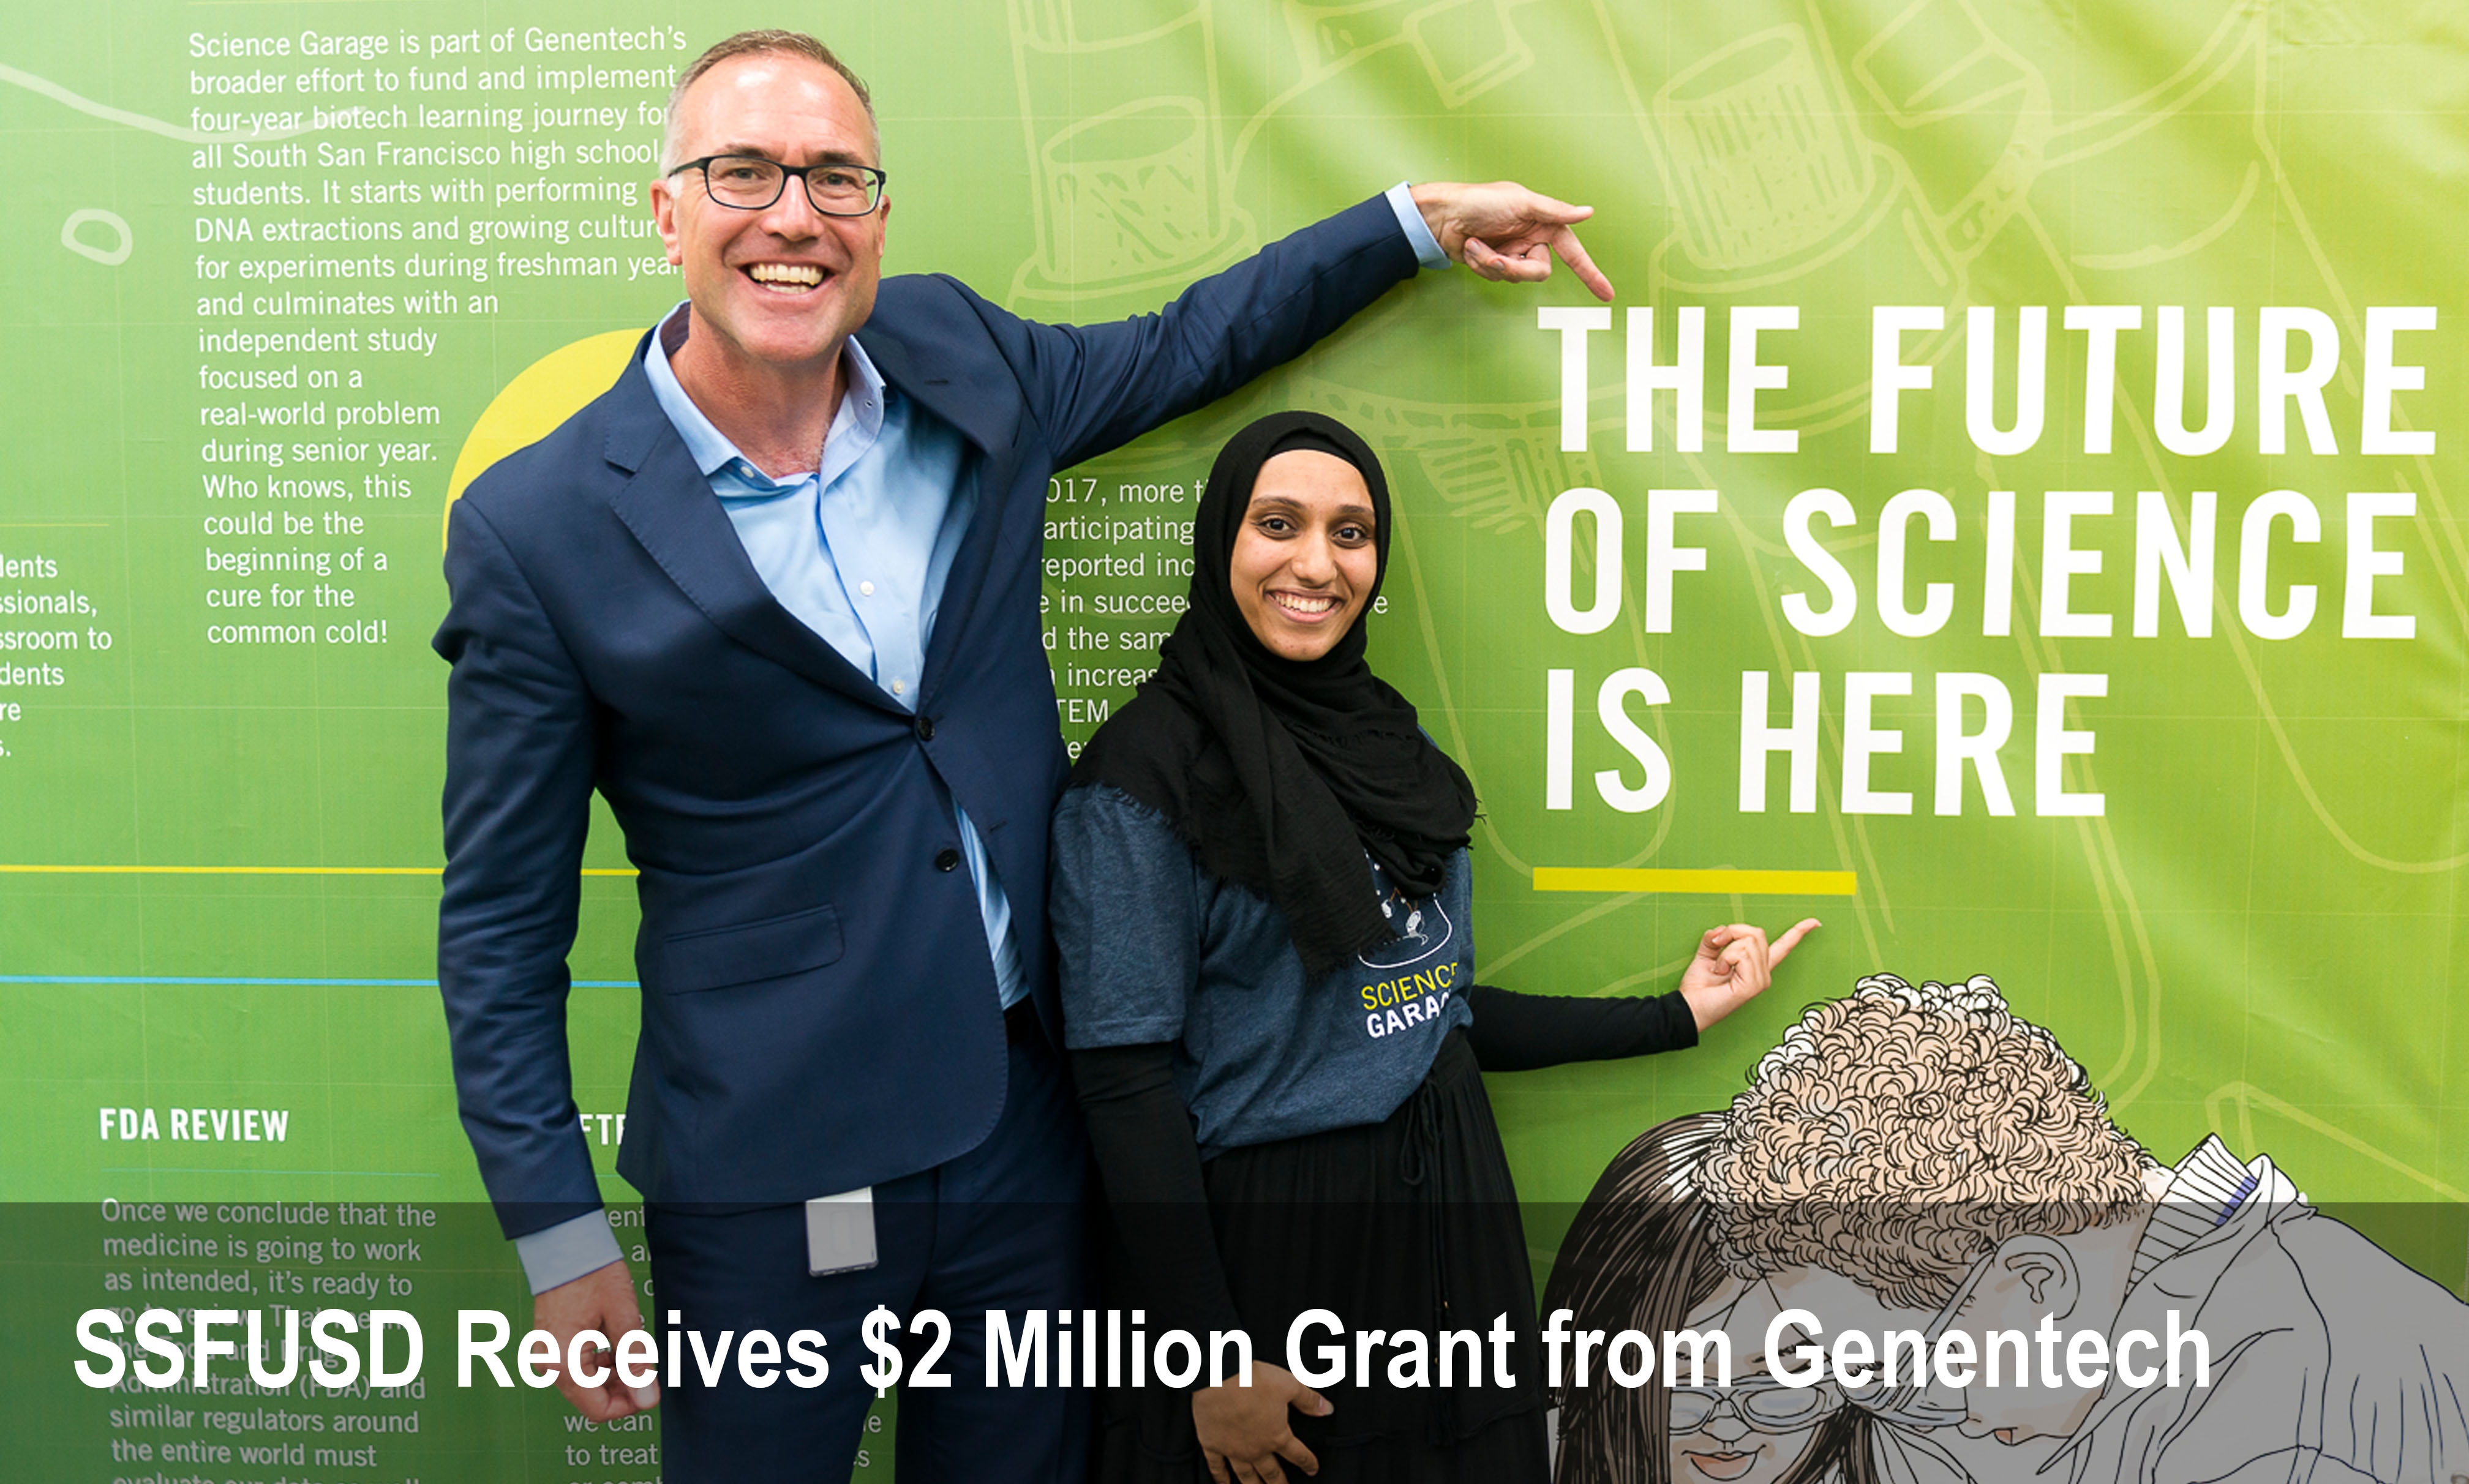 SSFUSD Receives $2 Million Grant from Genentech